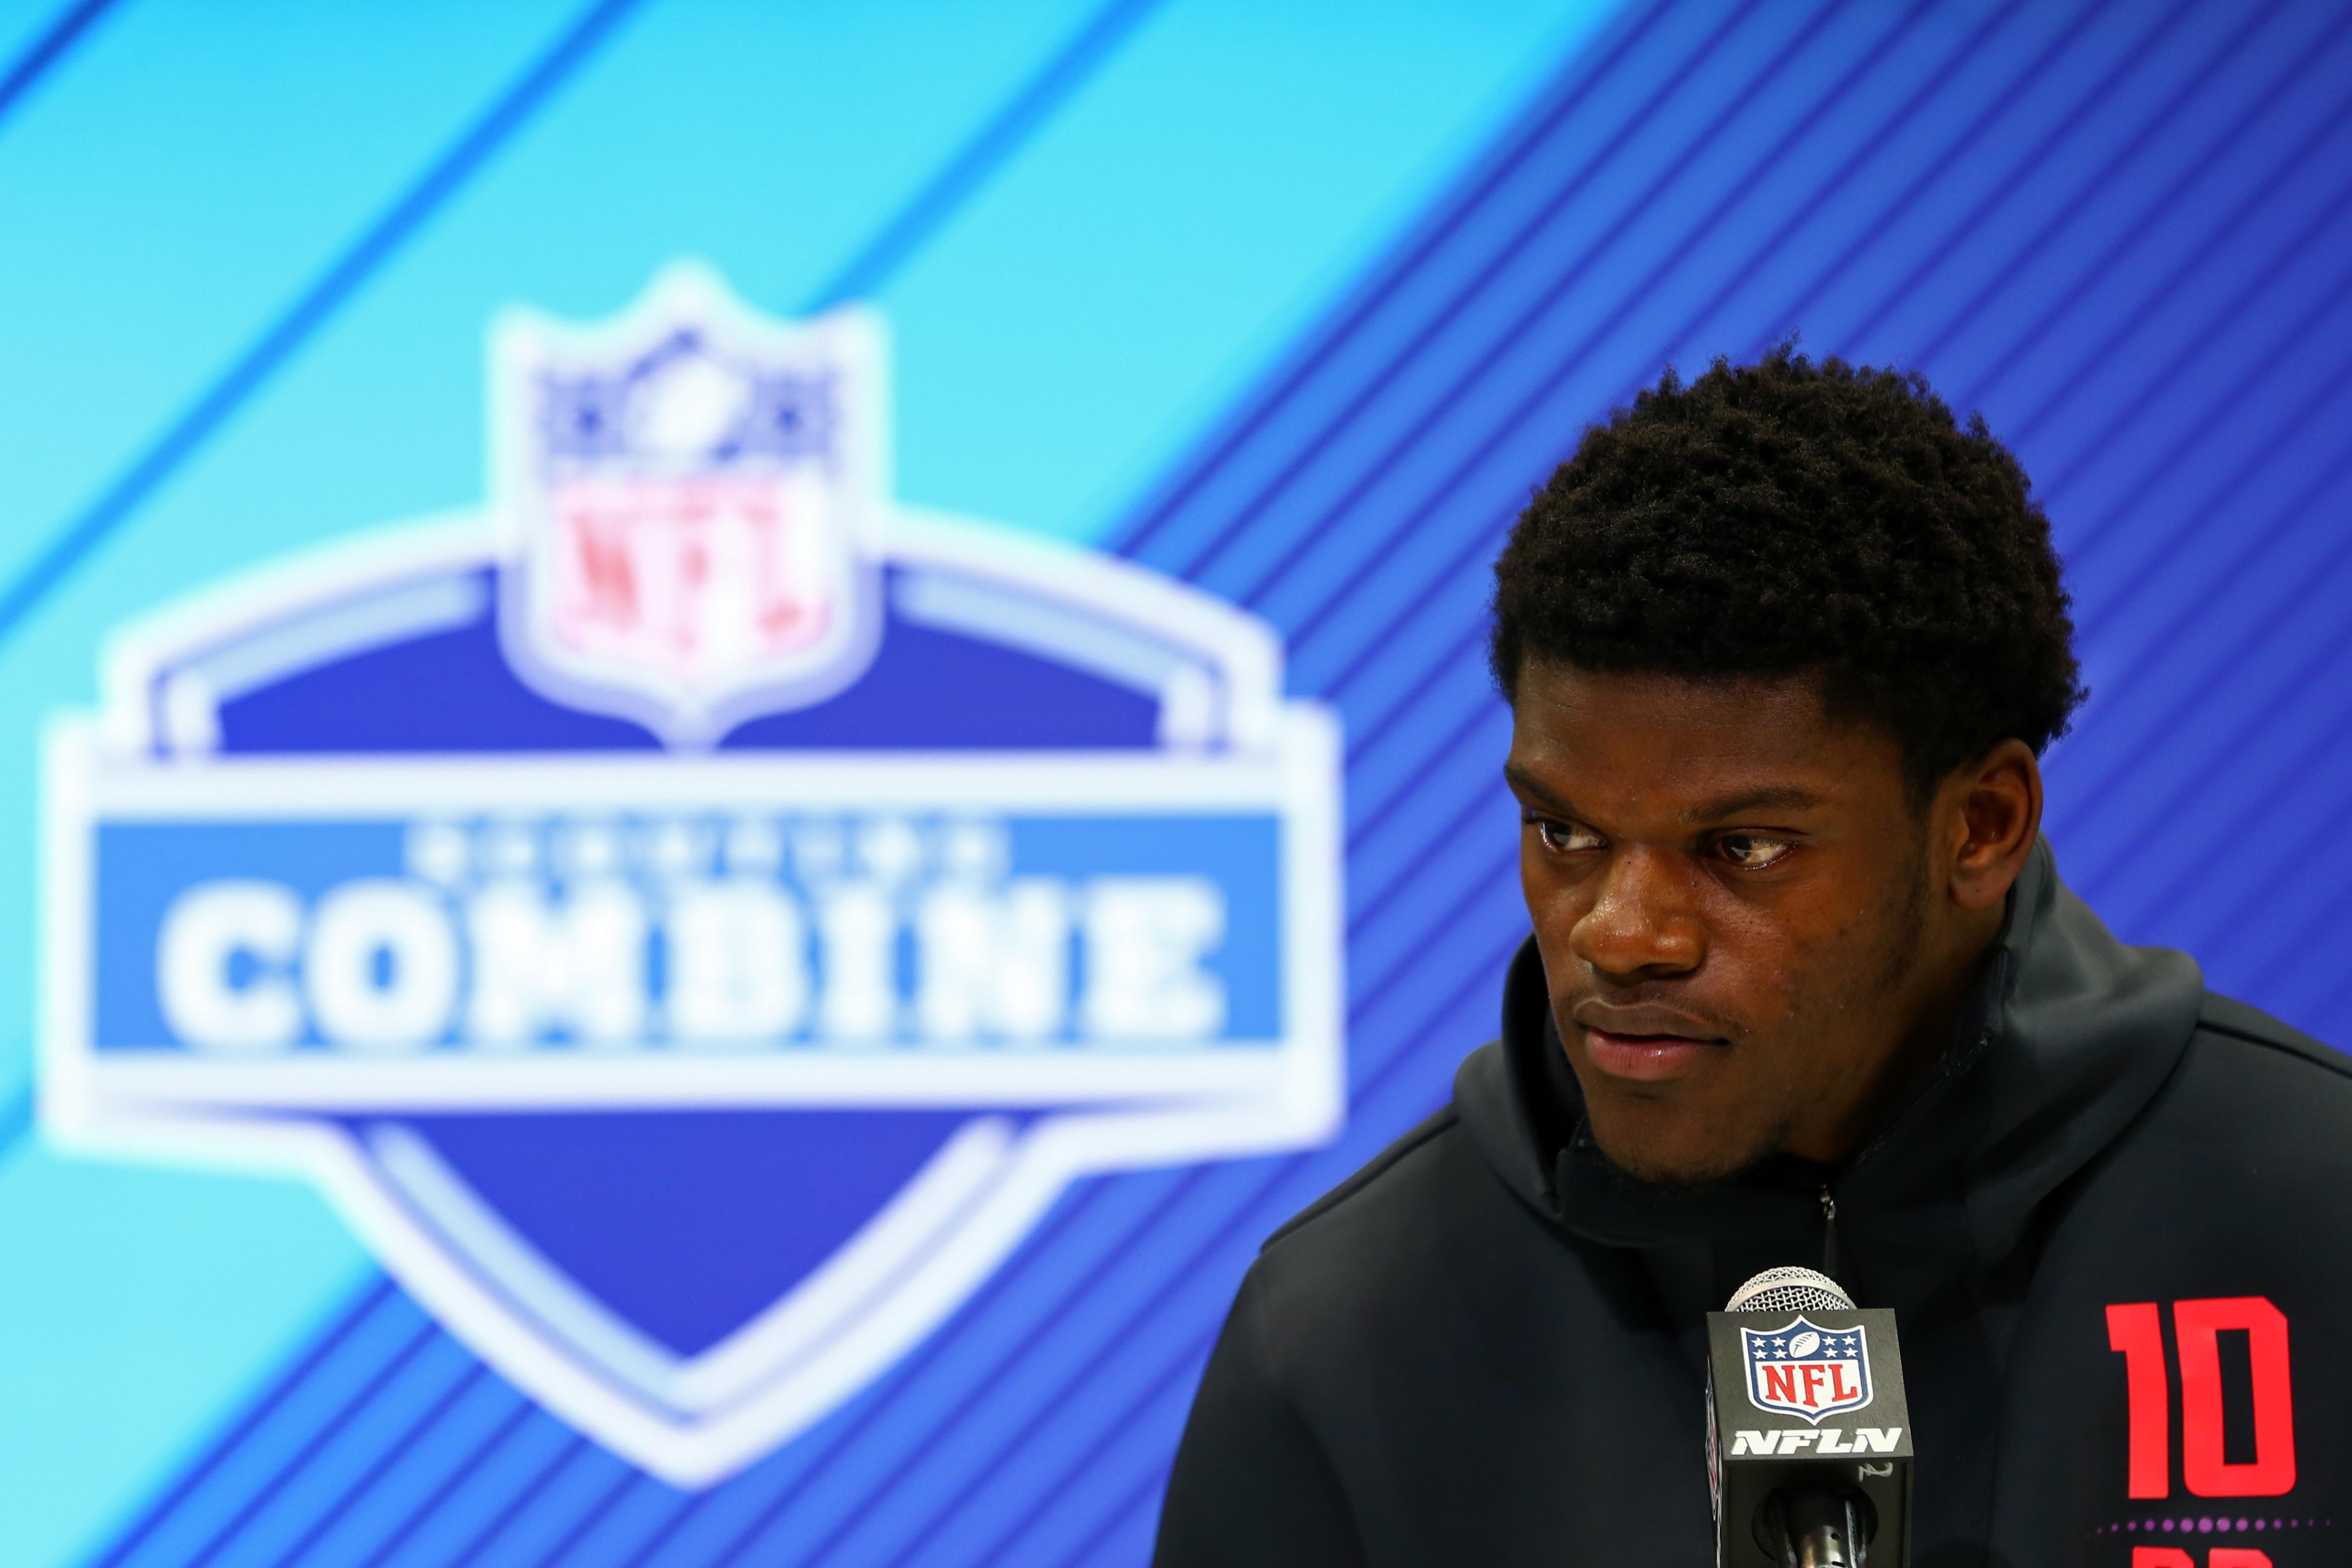 LIVE UPDATES: Quarterbacks take center stage at 2018 NFL Scouting Combine